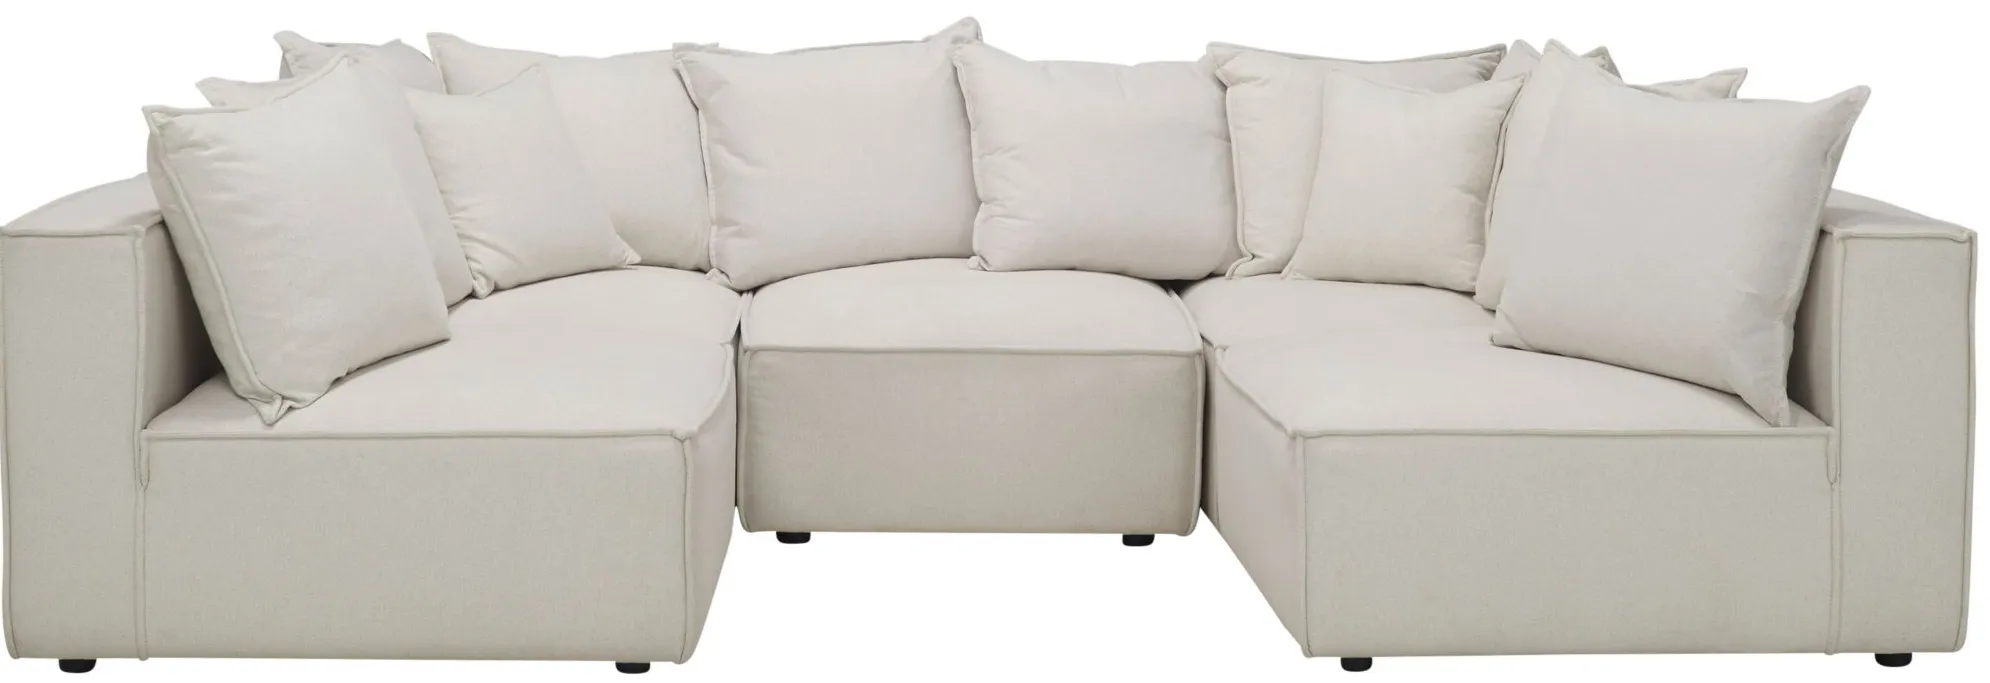 Loris Chenille 5-pc. Pit Sectional in White by Aria Designs